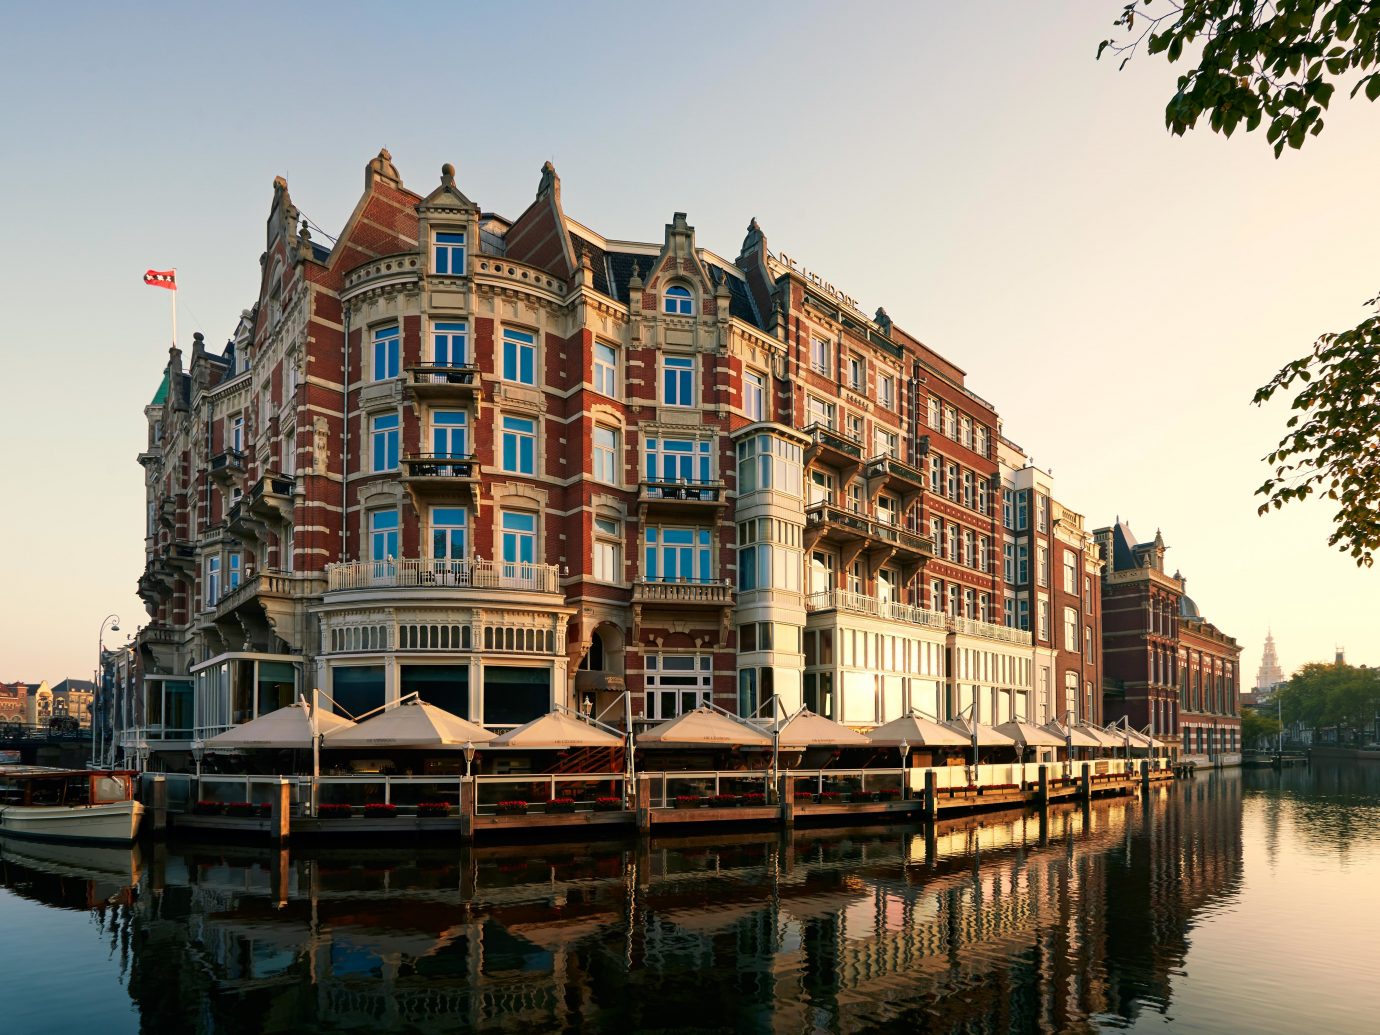 Amsterdam Architecture Buildings City Elegant Historic Hotels Lake The Netherlands Waterfront water outdoor sky Boat scene landmark reflection waterway River vehicle Harbor Canal tourism cityscape